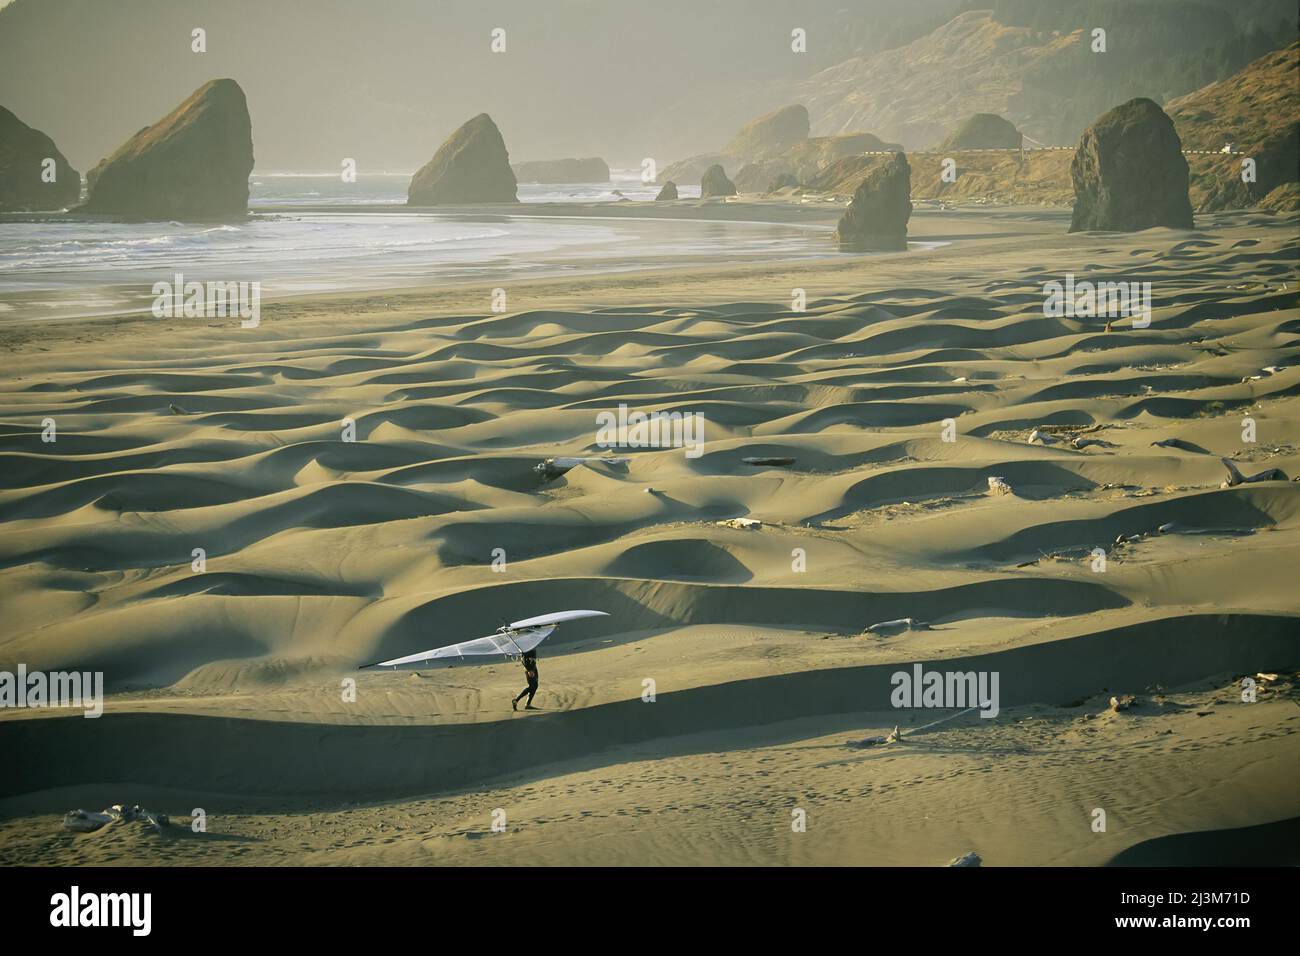 A windsurfer carries his board and sail over the sand dunes.; Oregon. Stock Photo